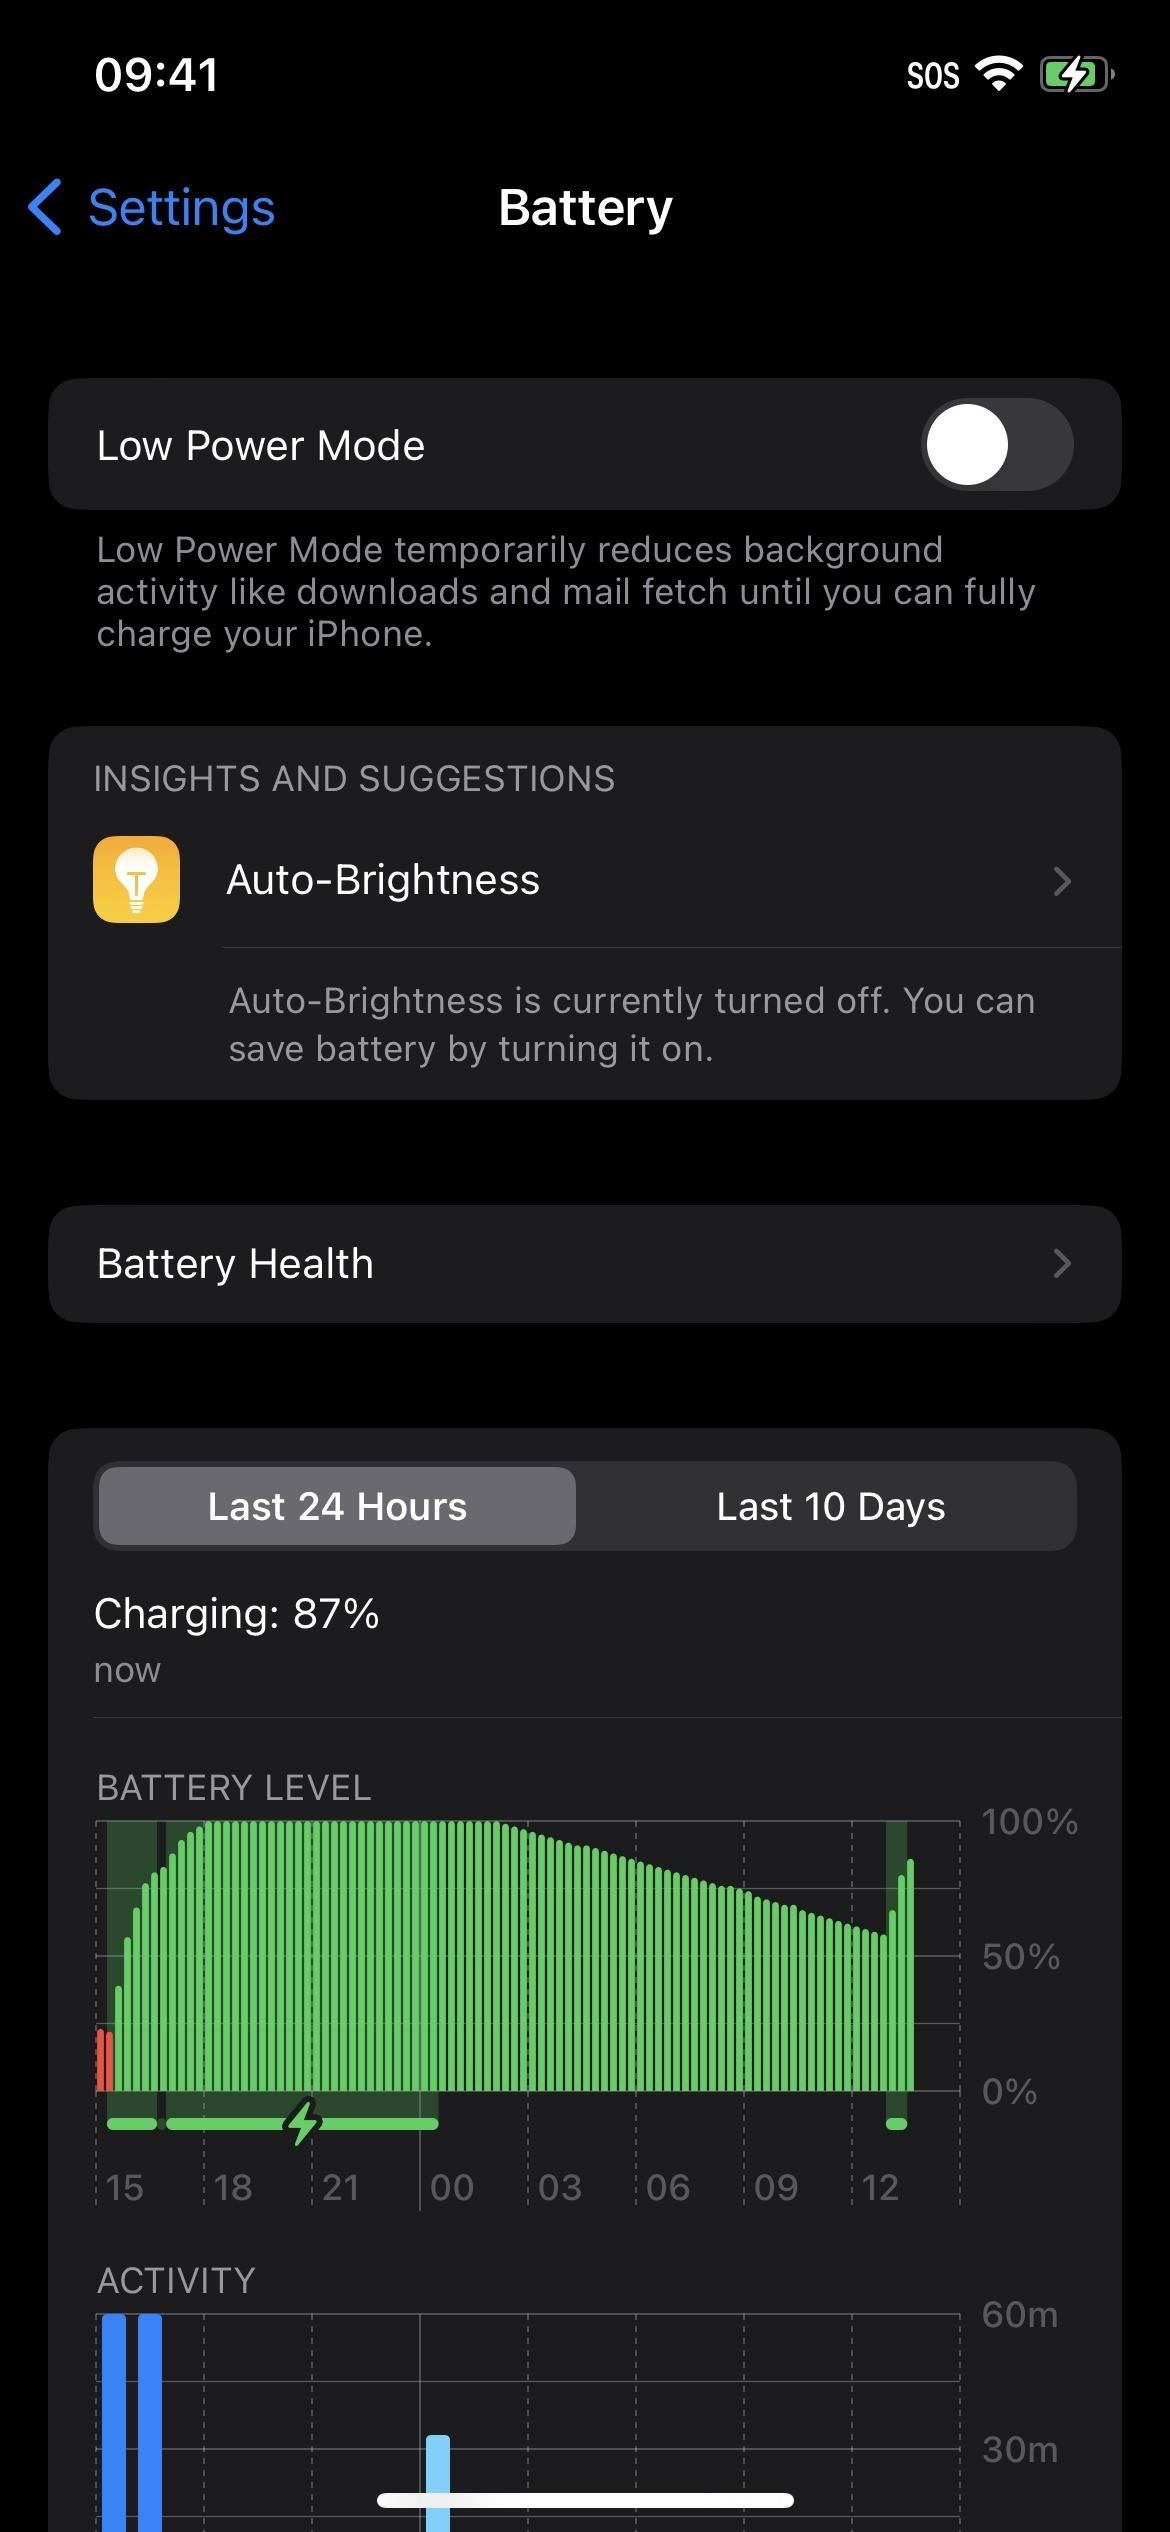 Finally! Permanently View Battery Percentage in Your iPhone's Status Bar Instead of Battery Levels